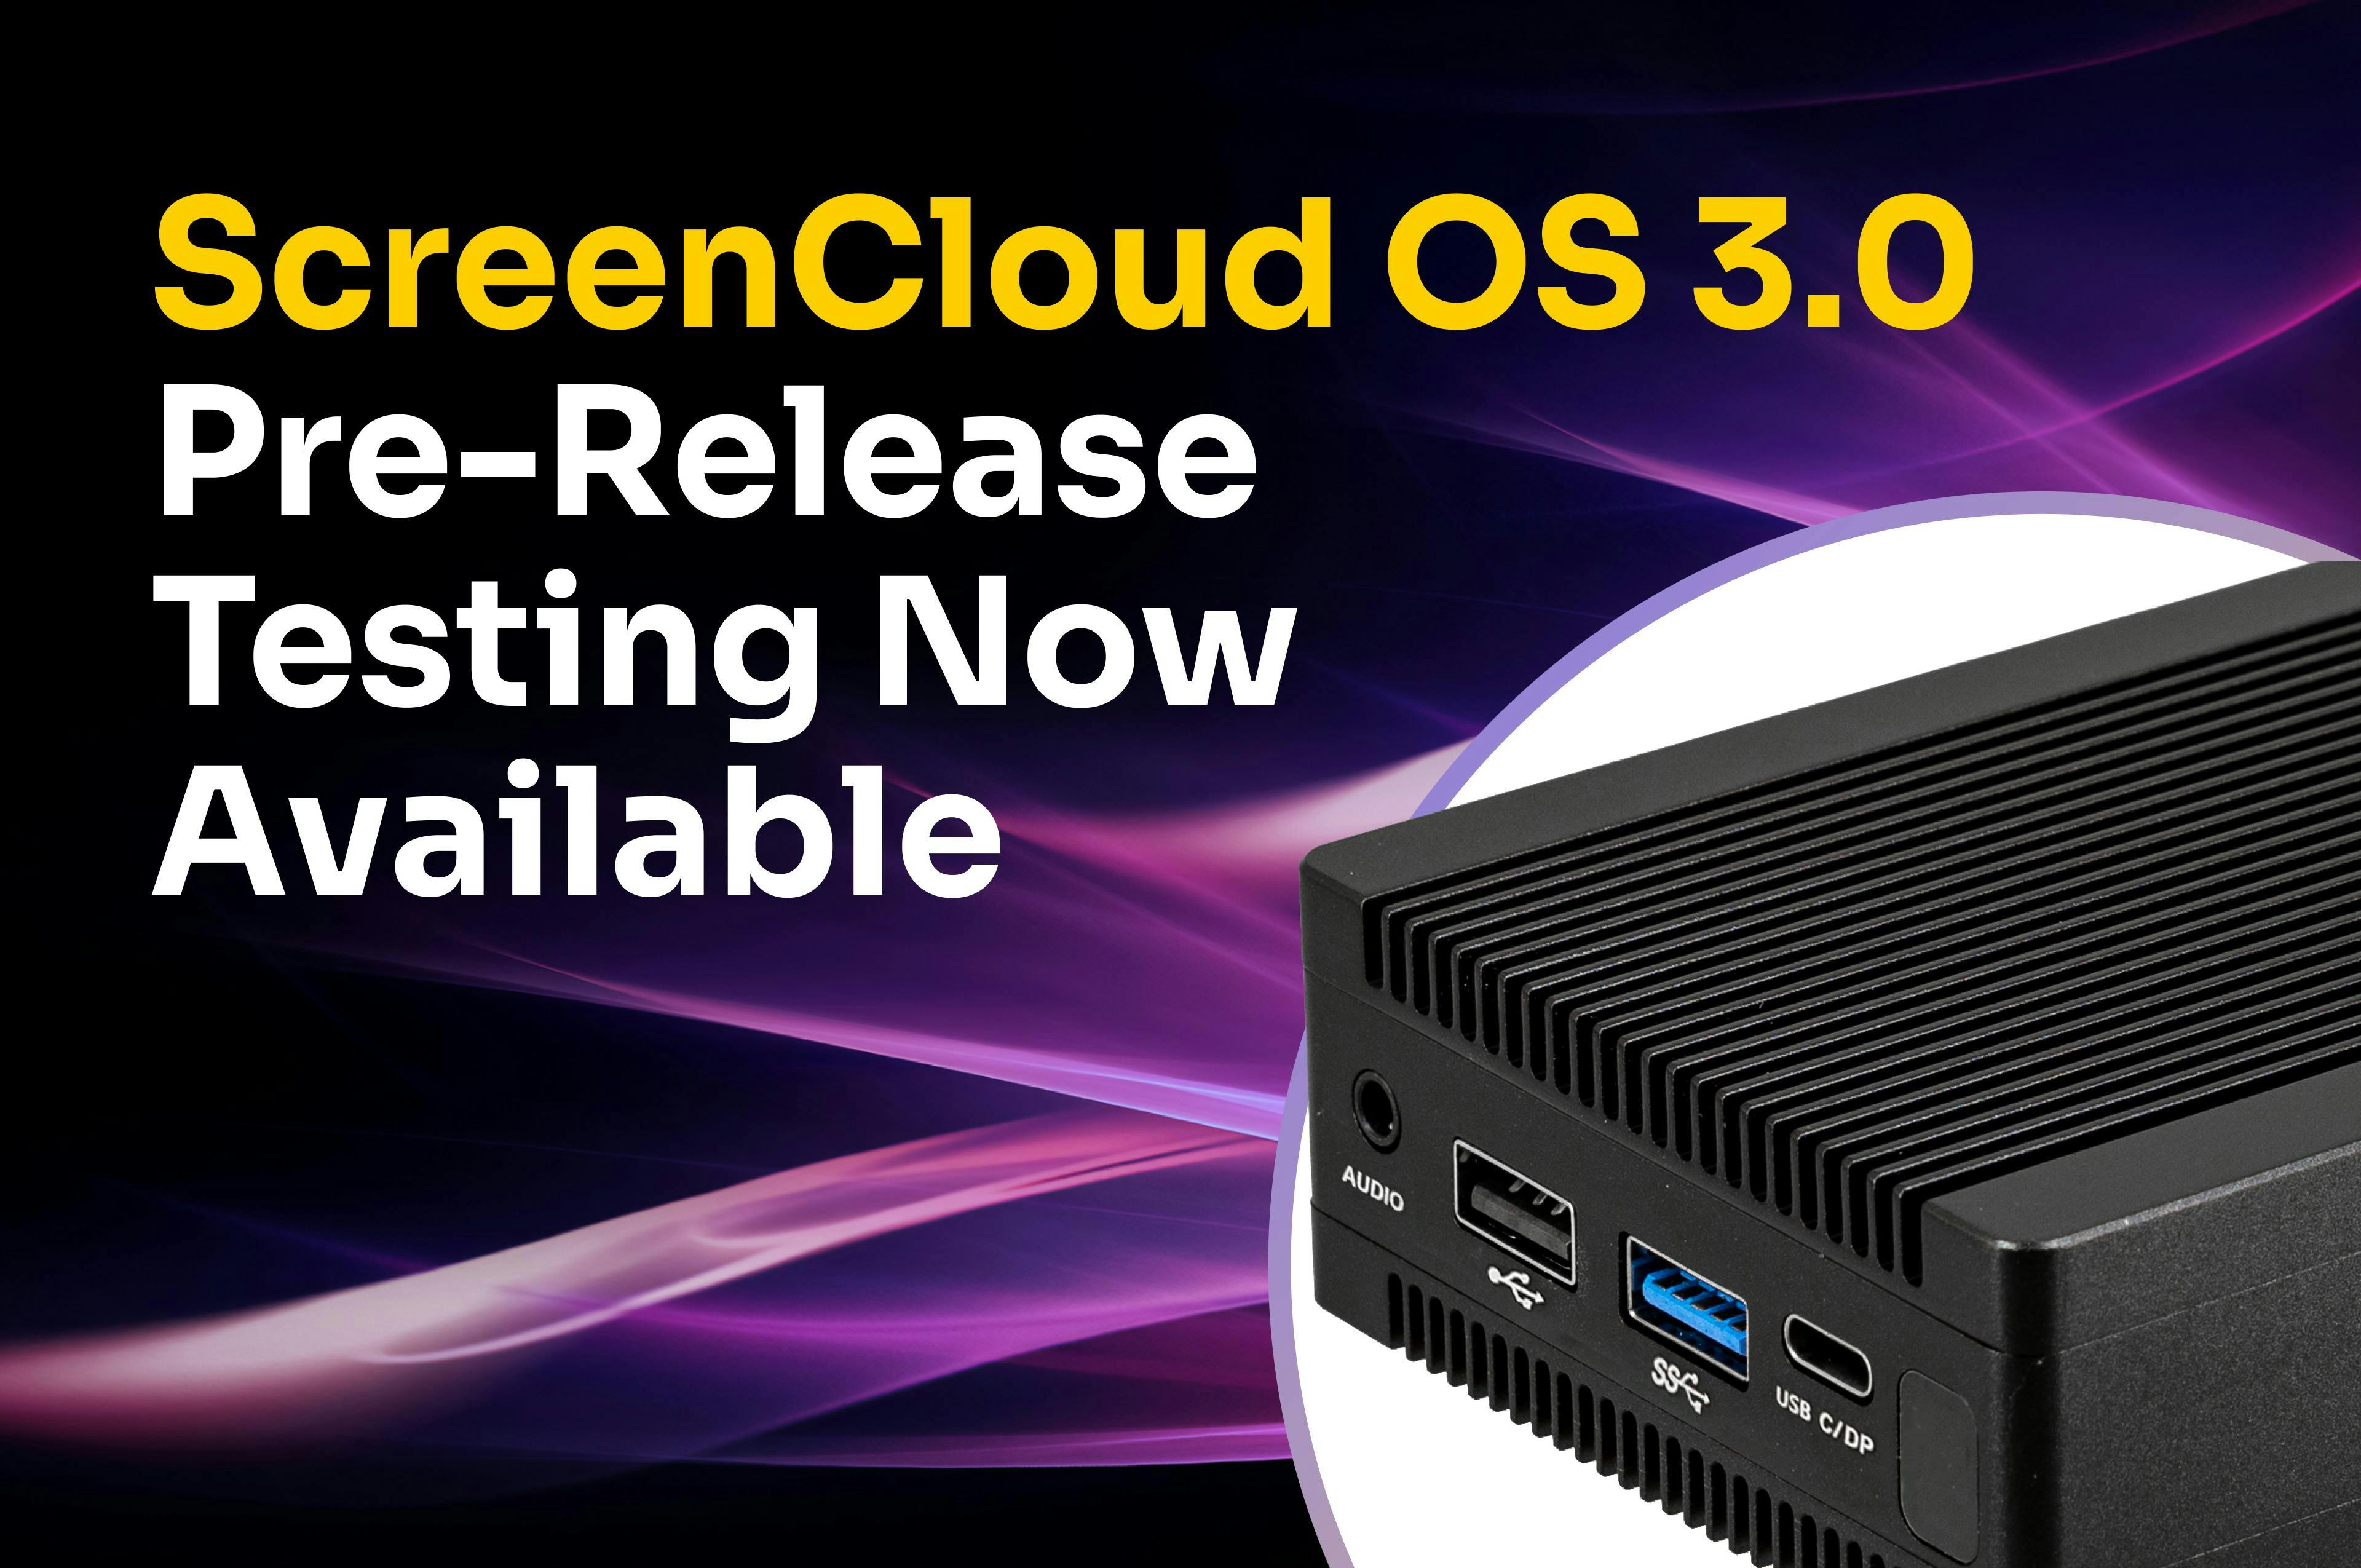 ScreenCloud Article - ScreenCloud OS 3.0 Pre-Release Available Now